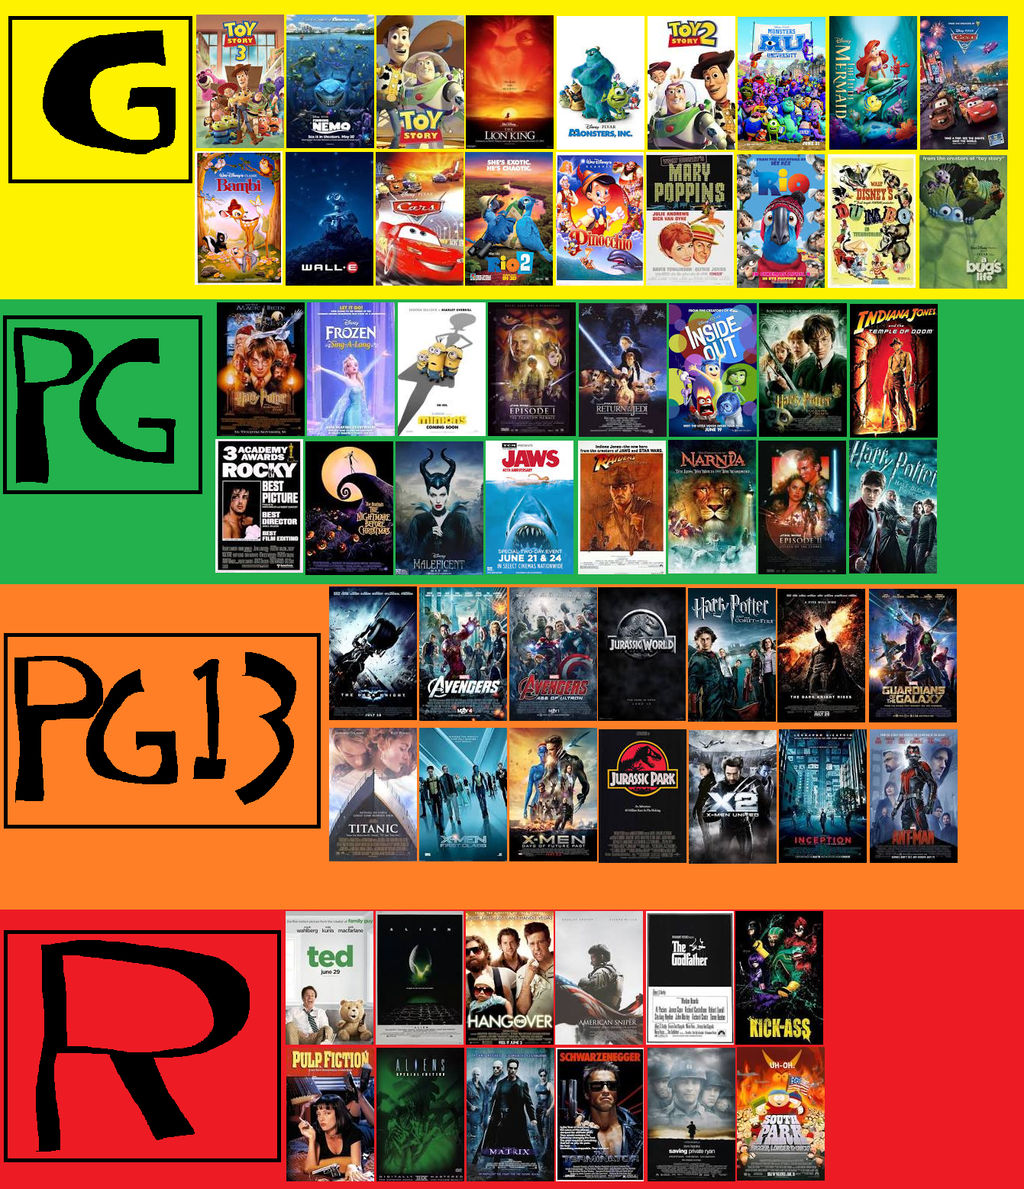 The MPAA Film Rating History by JamesMoulton1988 on DeviantArt